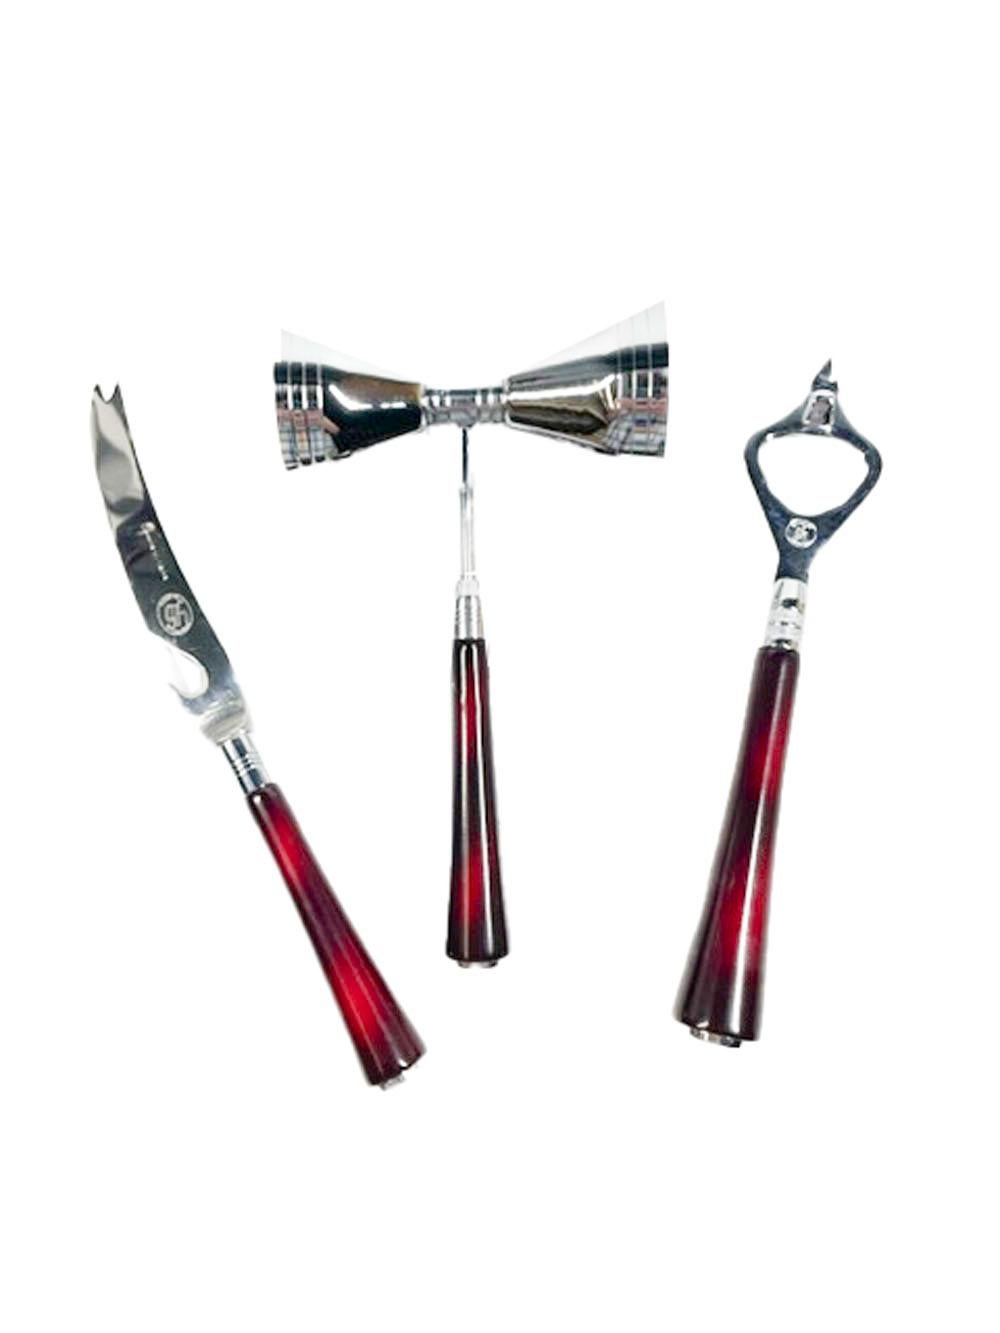 Glo-Hill 6 Piece Bar Tool Set with Carousel Stand in Cherry Bakelite and Chrome For Sale 2